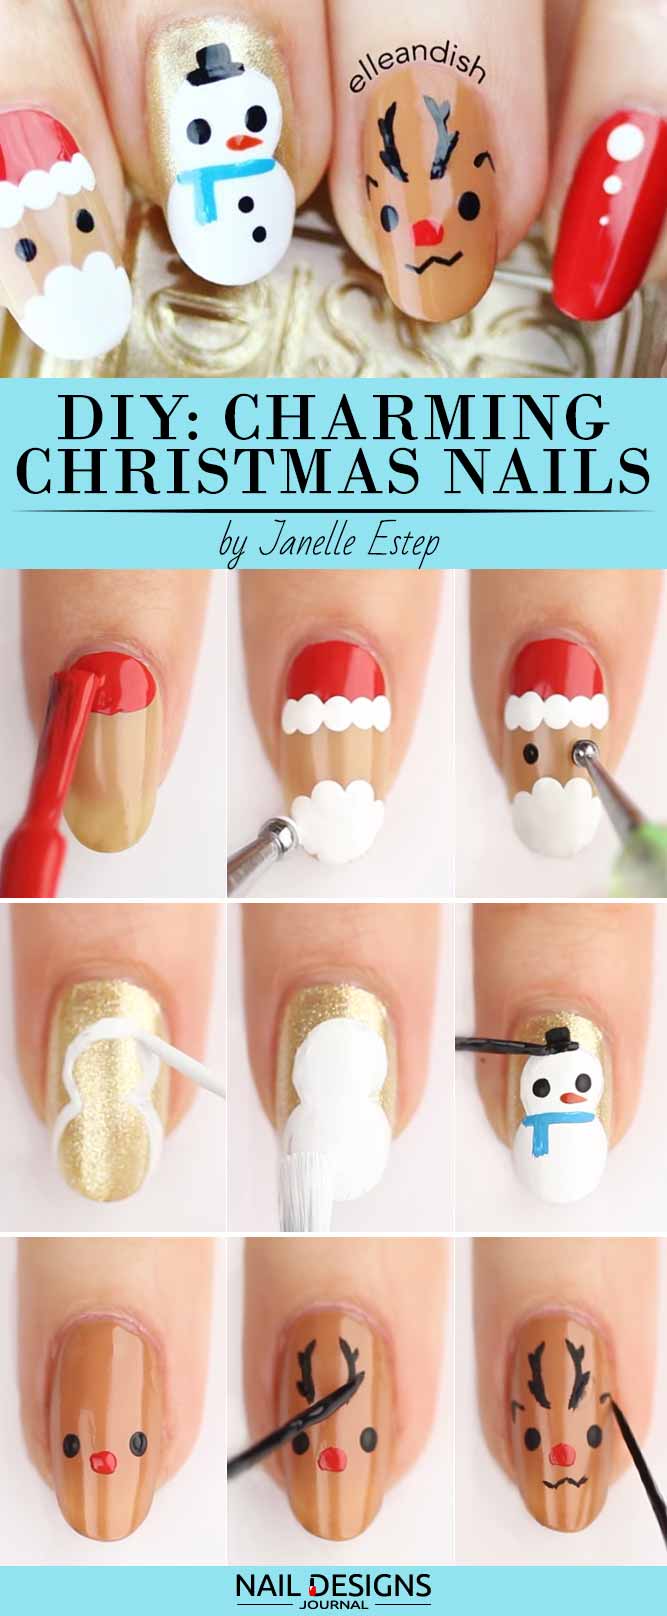 How to Do Charming Christmas Nails